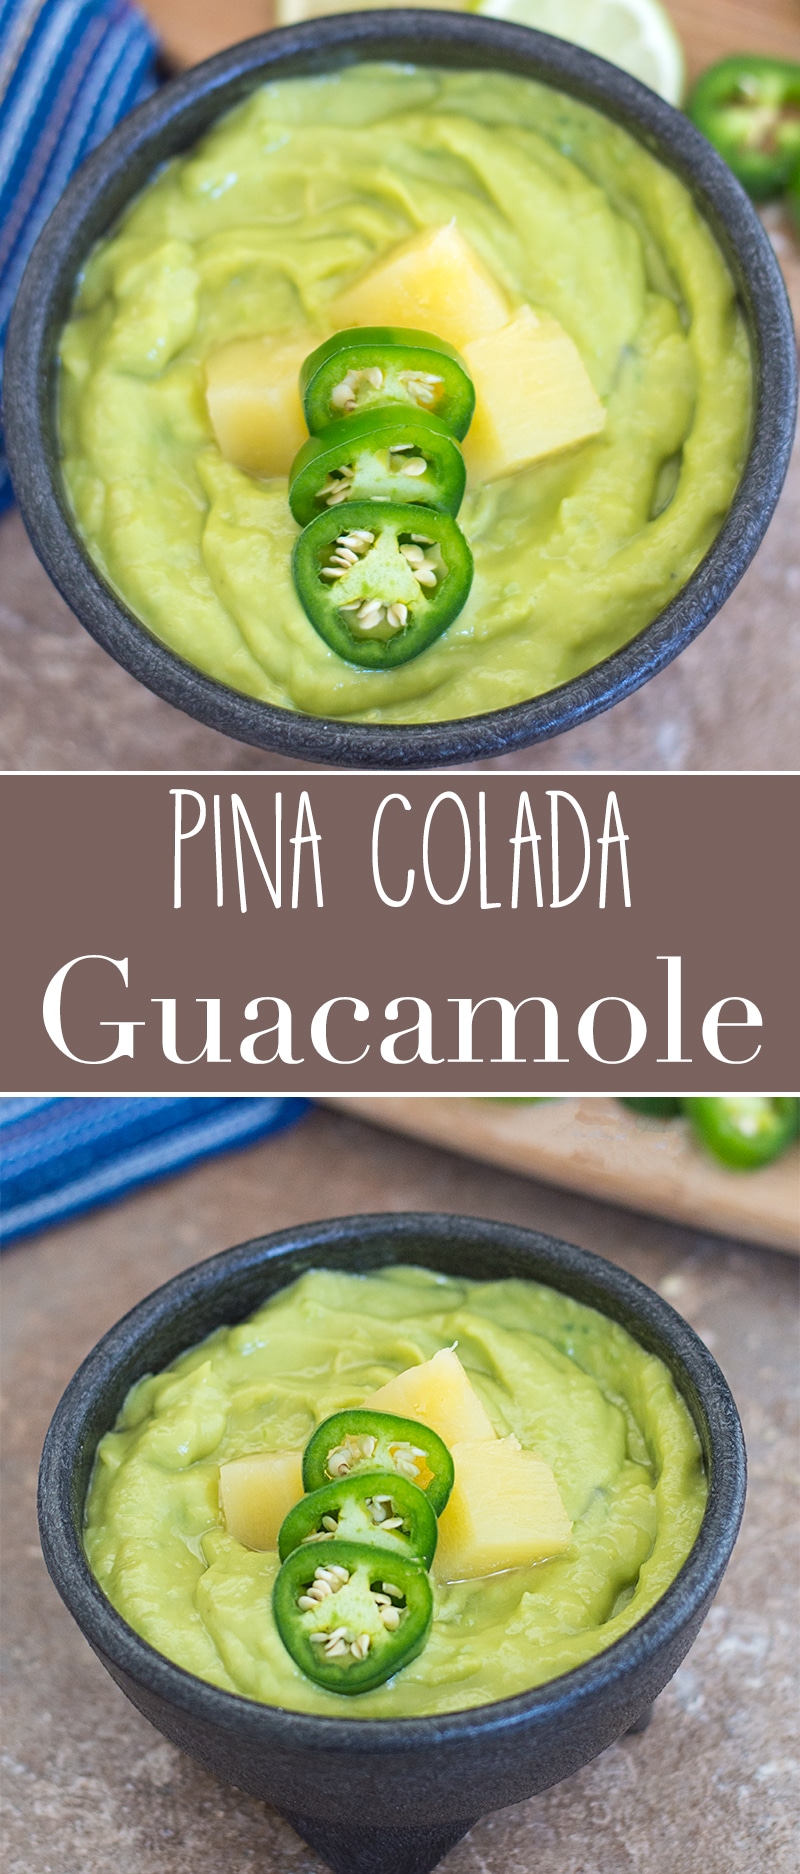 Pina Colada Guacamole is a must have for your Cinco De Mayo or any game day party. With only a few ingredients, it can be made in less than 10 minutes.